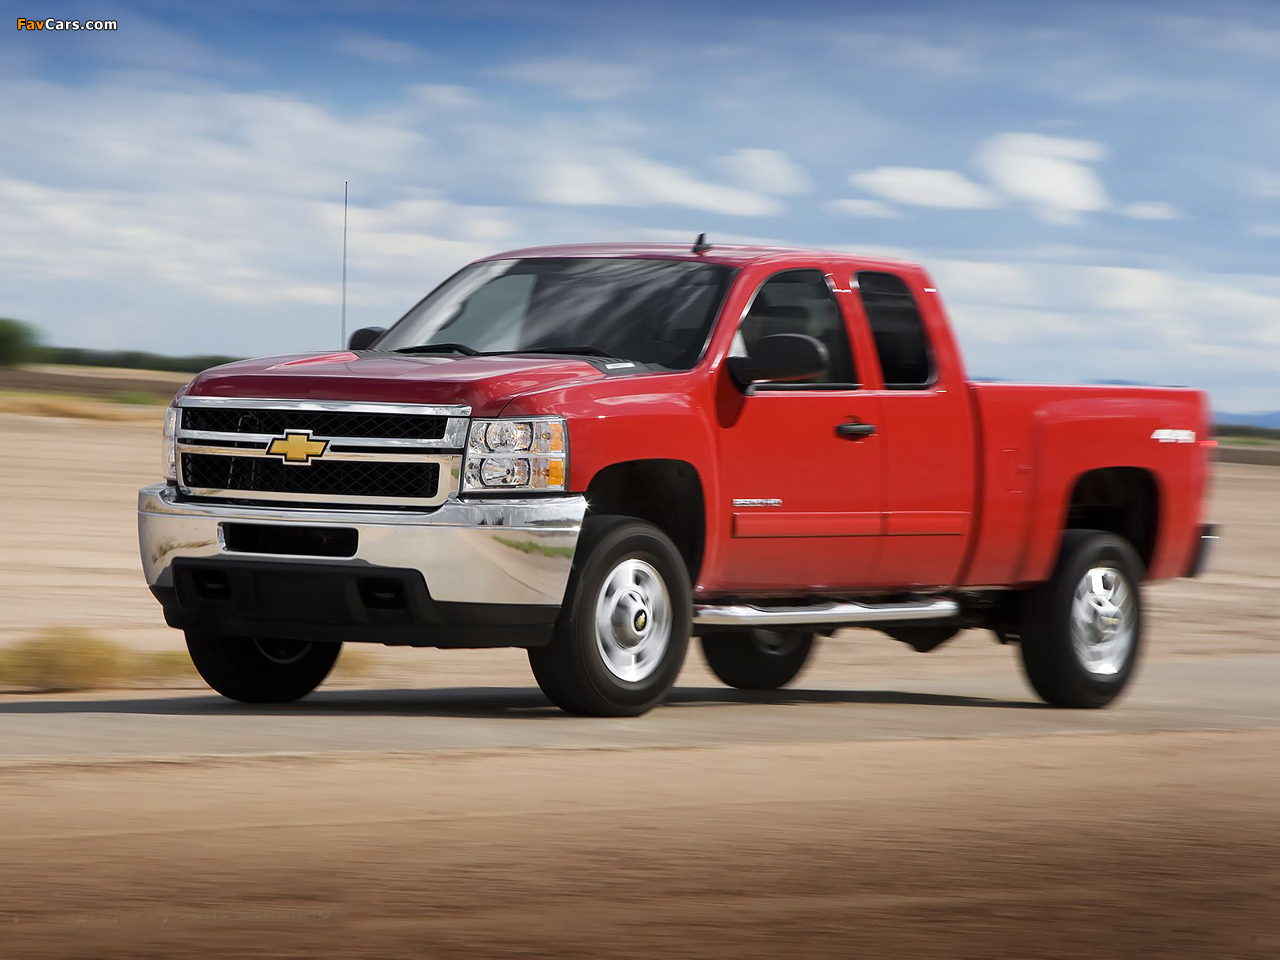 Chevrolet Silverado 2500 HD Extended Cab 2010 images (1280 x 960)